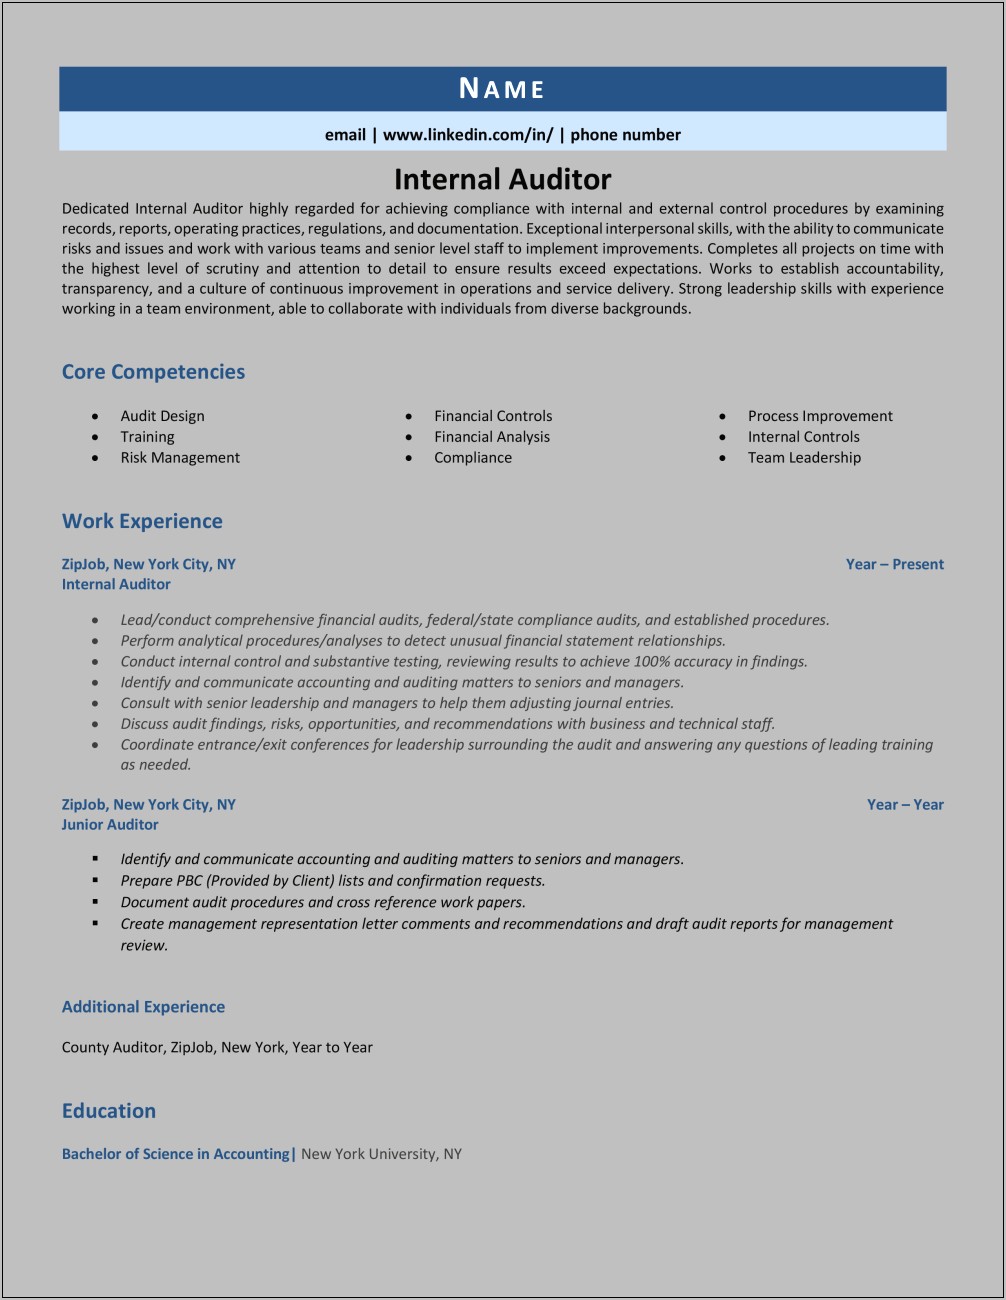 Internal Auditor Resume Objective Example